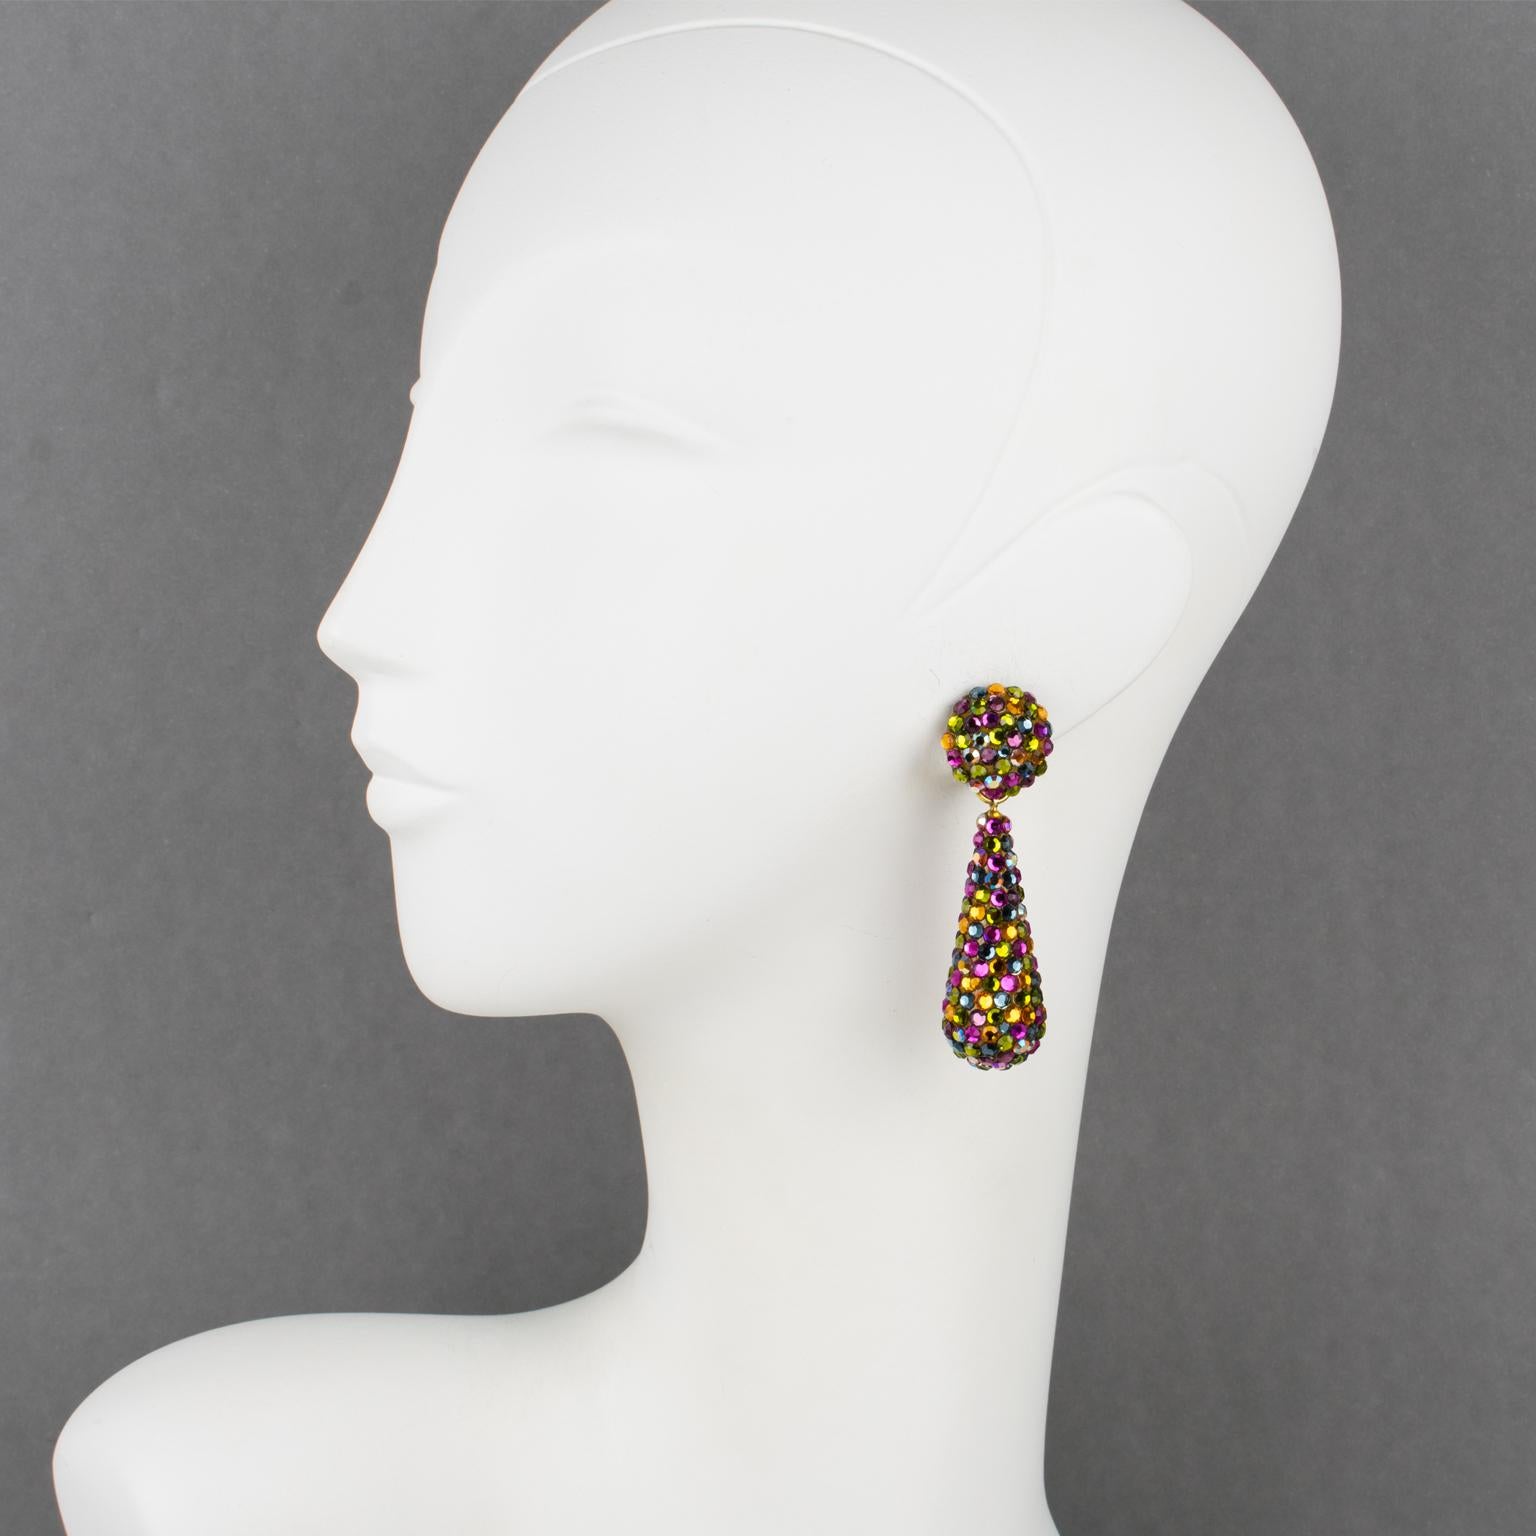 Gorgeous statement clip-on earrings designed by Richard Kerr in the 1980s. They are made of his signature pave rhinestones. 
They feature dangling long teardrop shapes covered with colorful crystal rhinestones on a beige resin background frame.